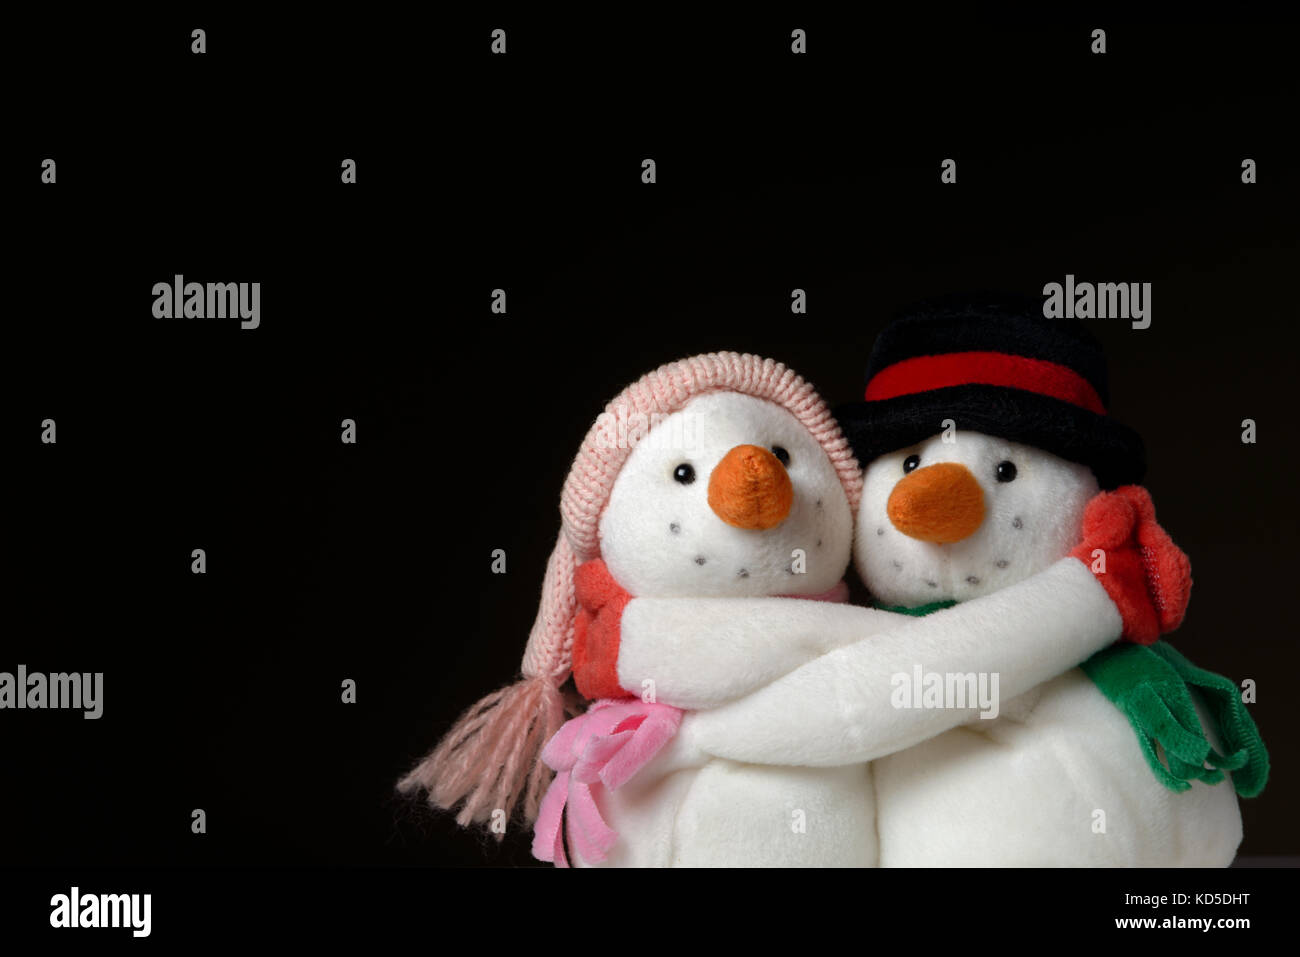 Two hugging snowmen on black background representing warmth and happiness isolated against monochromatic background.Studio shot. Stock Photo